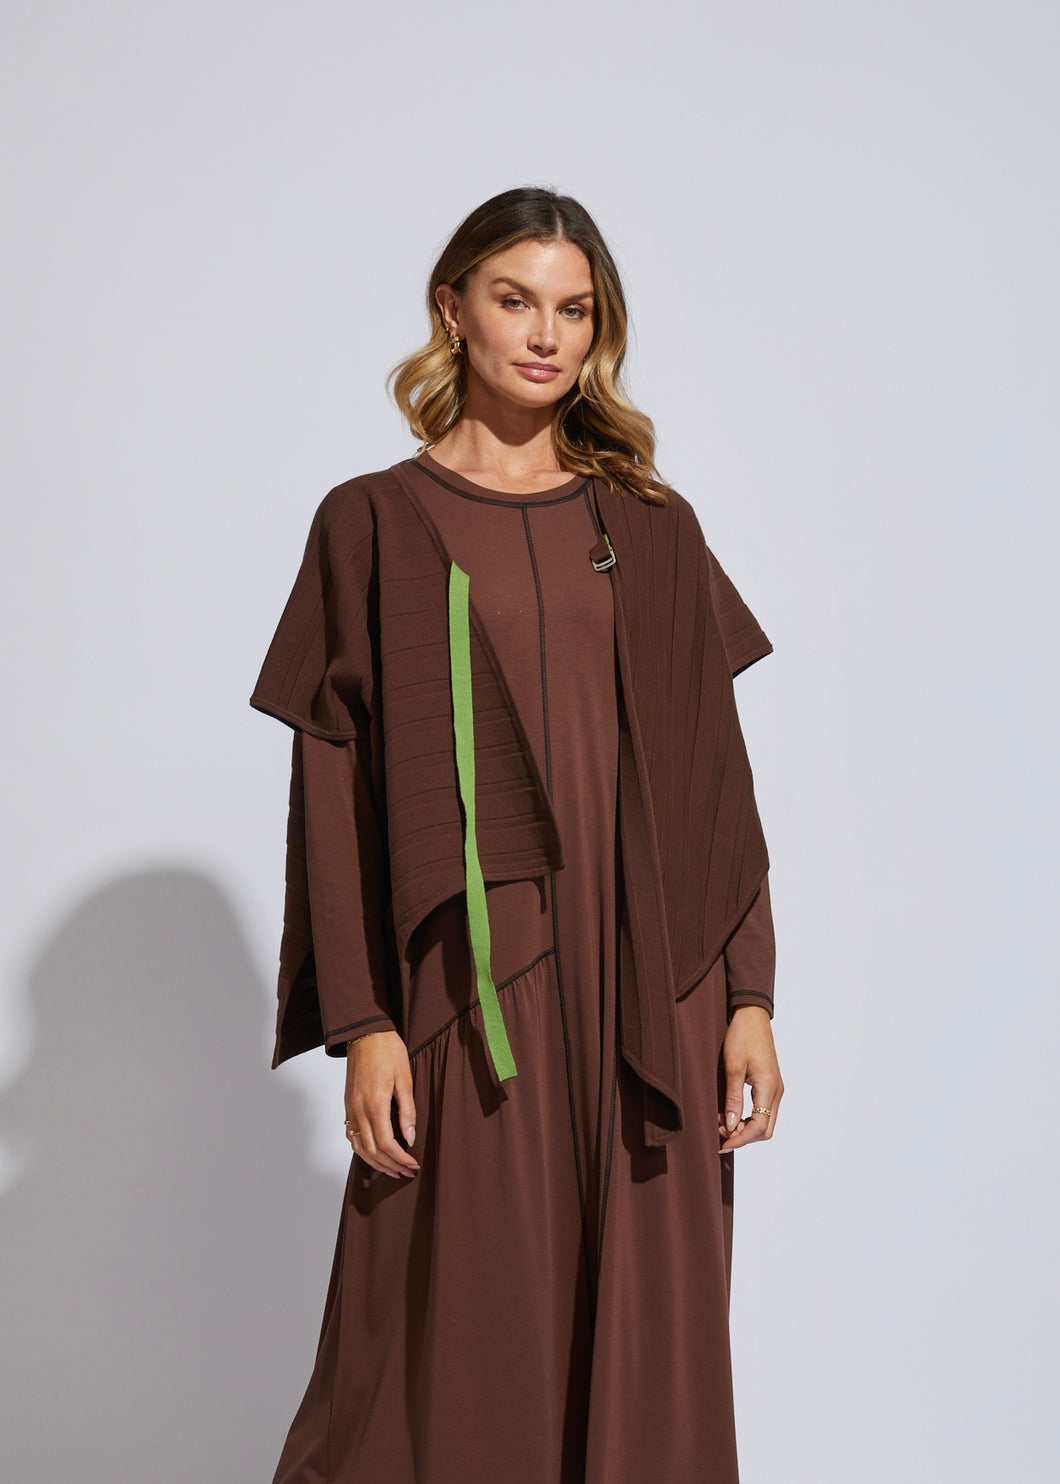 ld & Co  Nutshell Chocolate Knit Cape - Sizes: XS/S  M/L